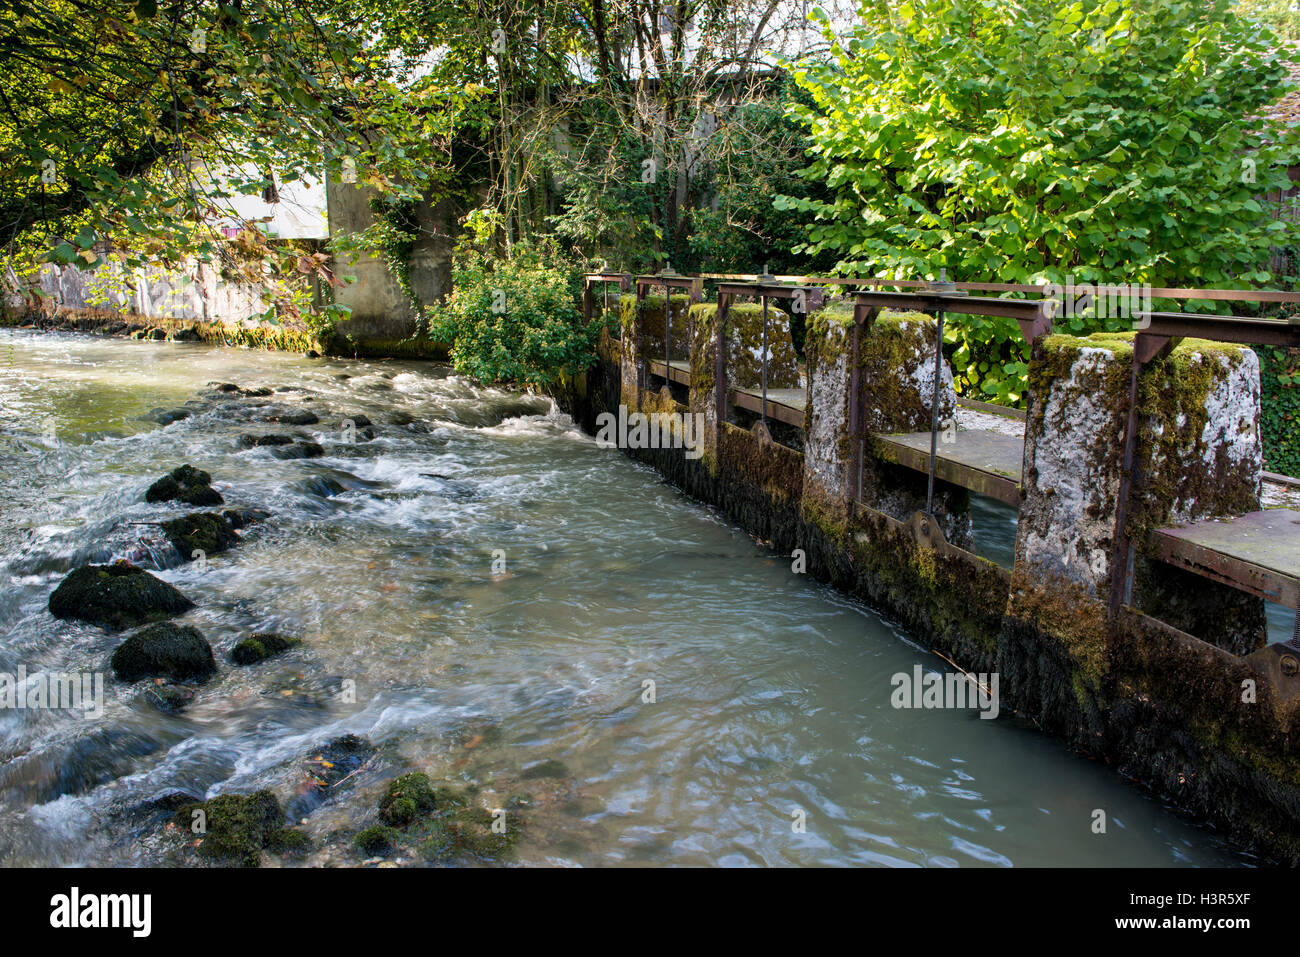 Gated weir, Divonne Les Bains, Ain dipartimento in Francia orientale Foto Stock